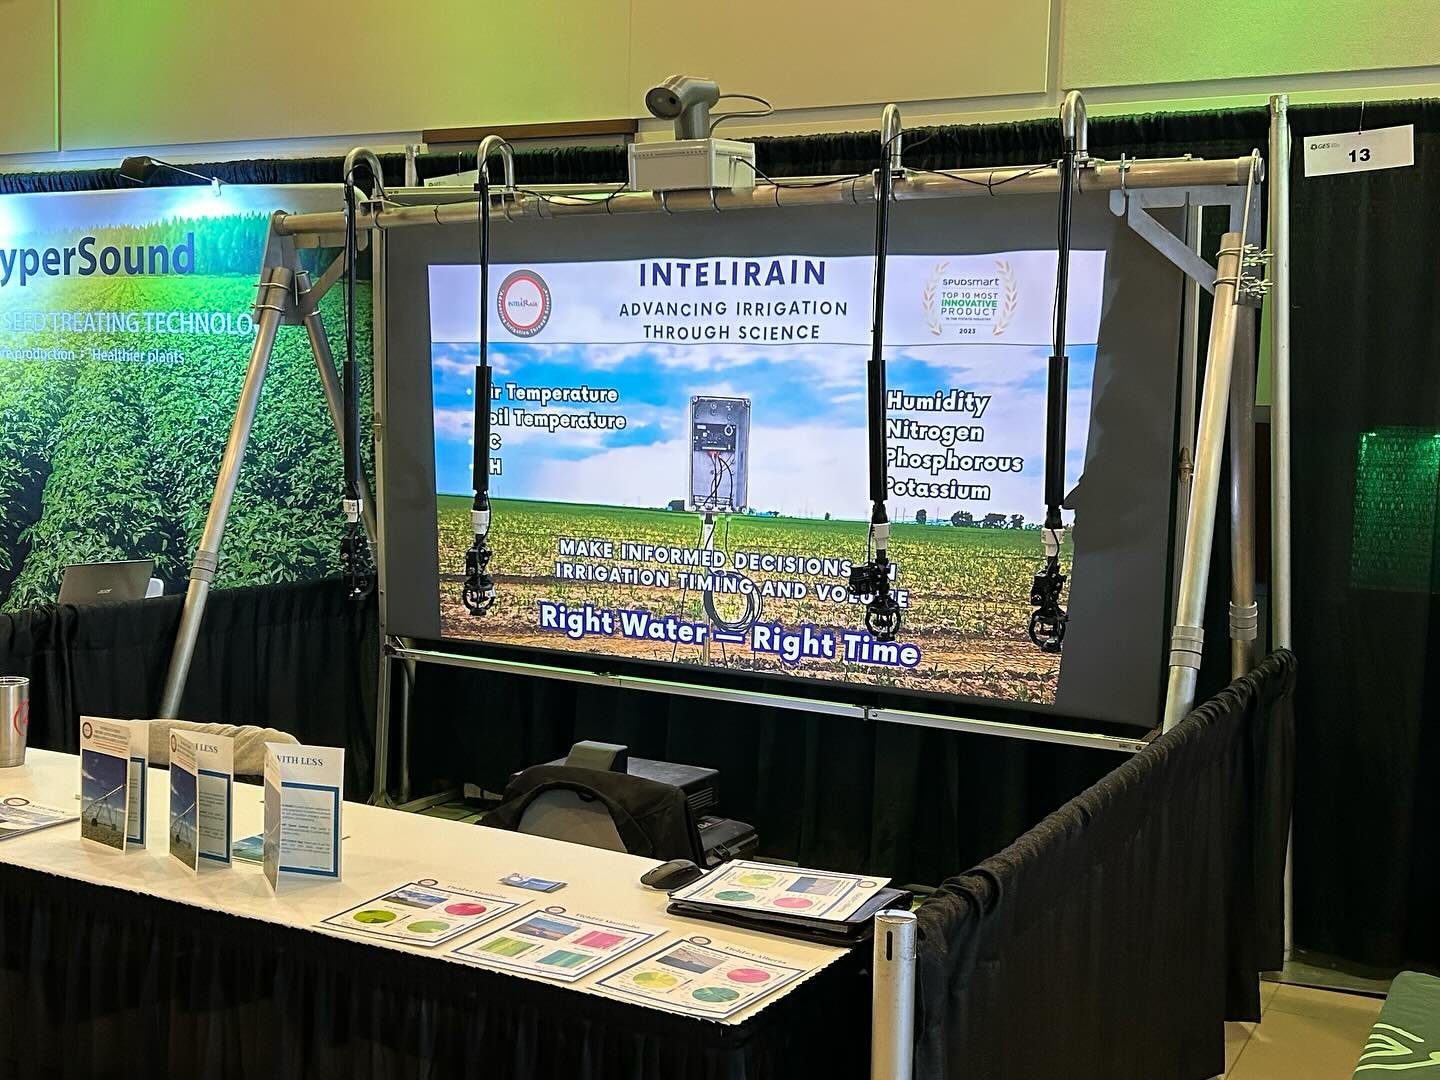 Lots of interest in our revolutionary irrigation technology at the PGA show this week. Come check us out if you&rsquo;re up here at the Grey Eagle!